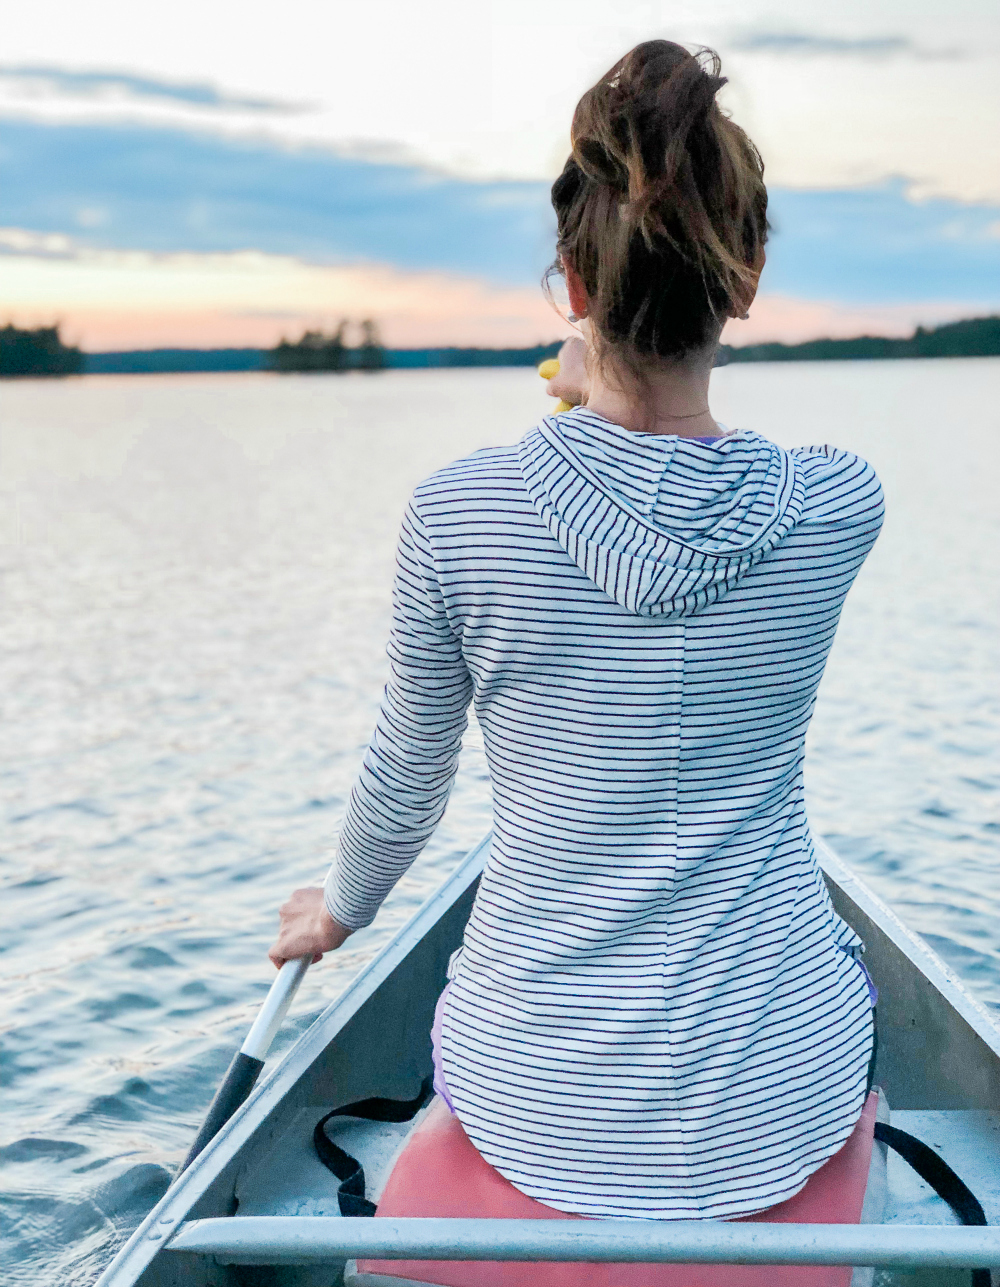 Maine vacation recap, Summer Bucket List: The Best Things to Do in Maine in Summer by southern lifestyle blogger Stephanie Ziajka from Diary of a Debutante, Maine bucket list, things to do in Maine, Lake Damariscotta, things to do in Damariscotta Maine, Maine sunset